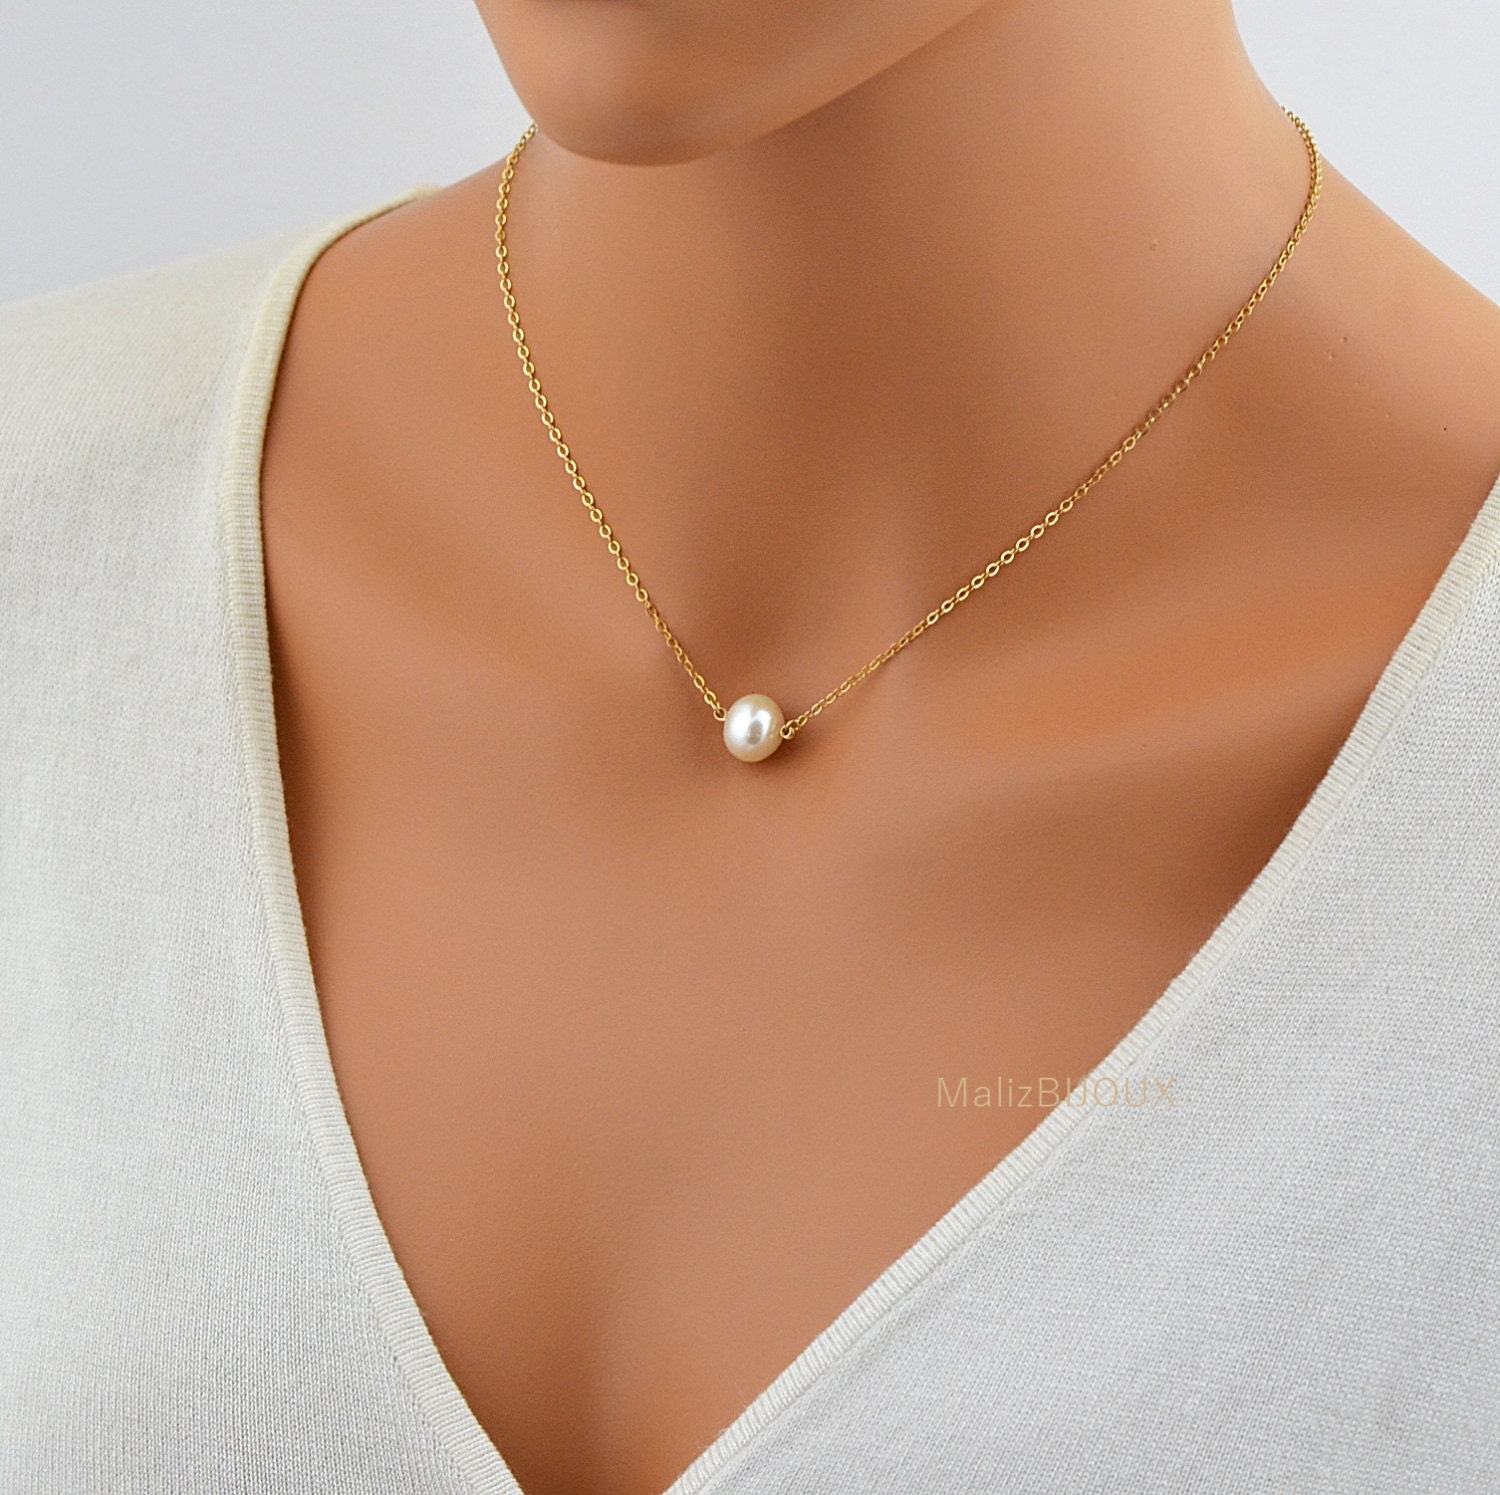 White Moti Choker Gold Plated Necklace with earrings, Jewellery, Necklace  Free Delivery India.